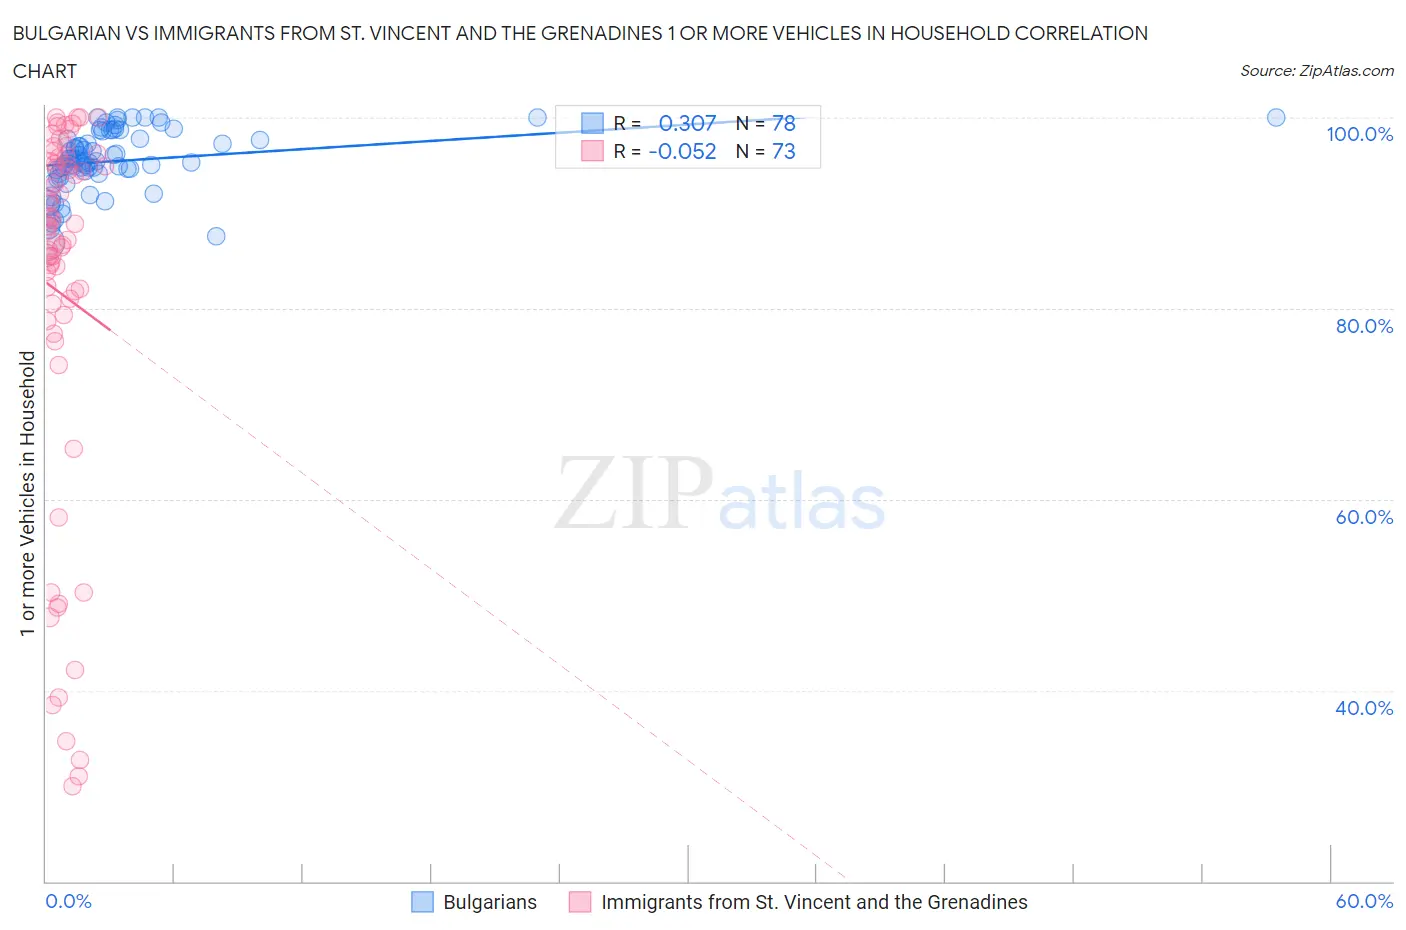 Bulgarian vs Immigrants from St. Vincent and the Grenadines 1 or more Vehicles in Household